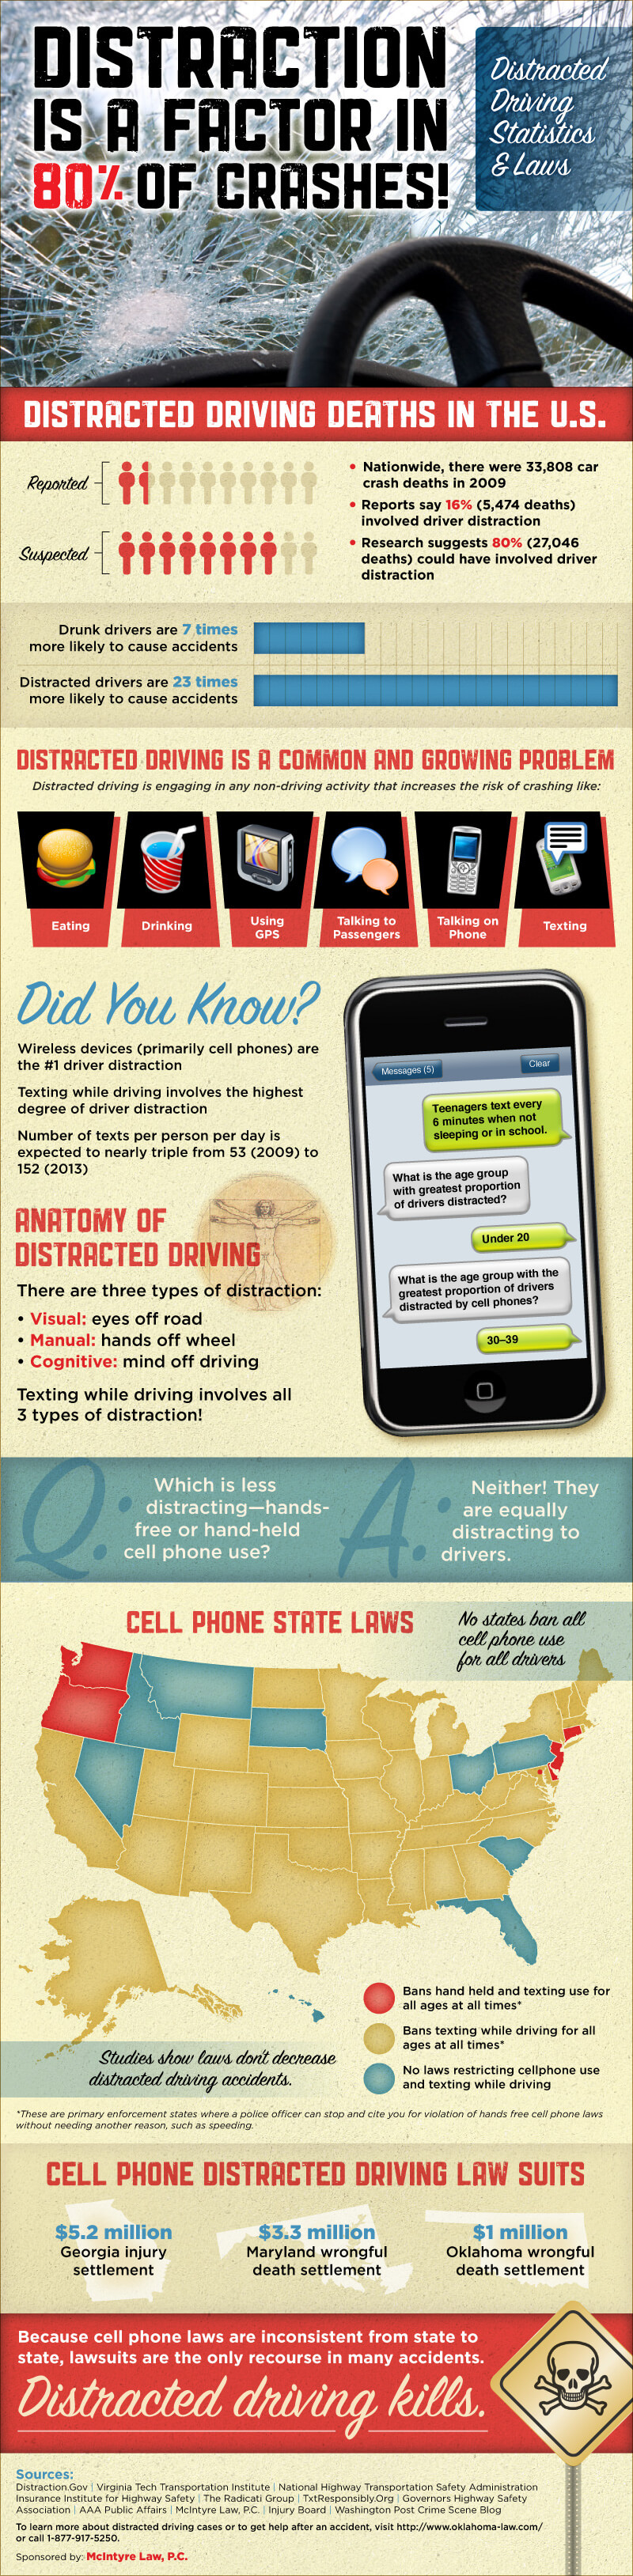 Distracted Driving Statistics & Laws